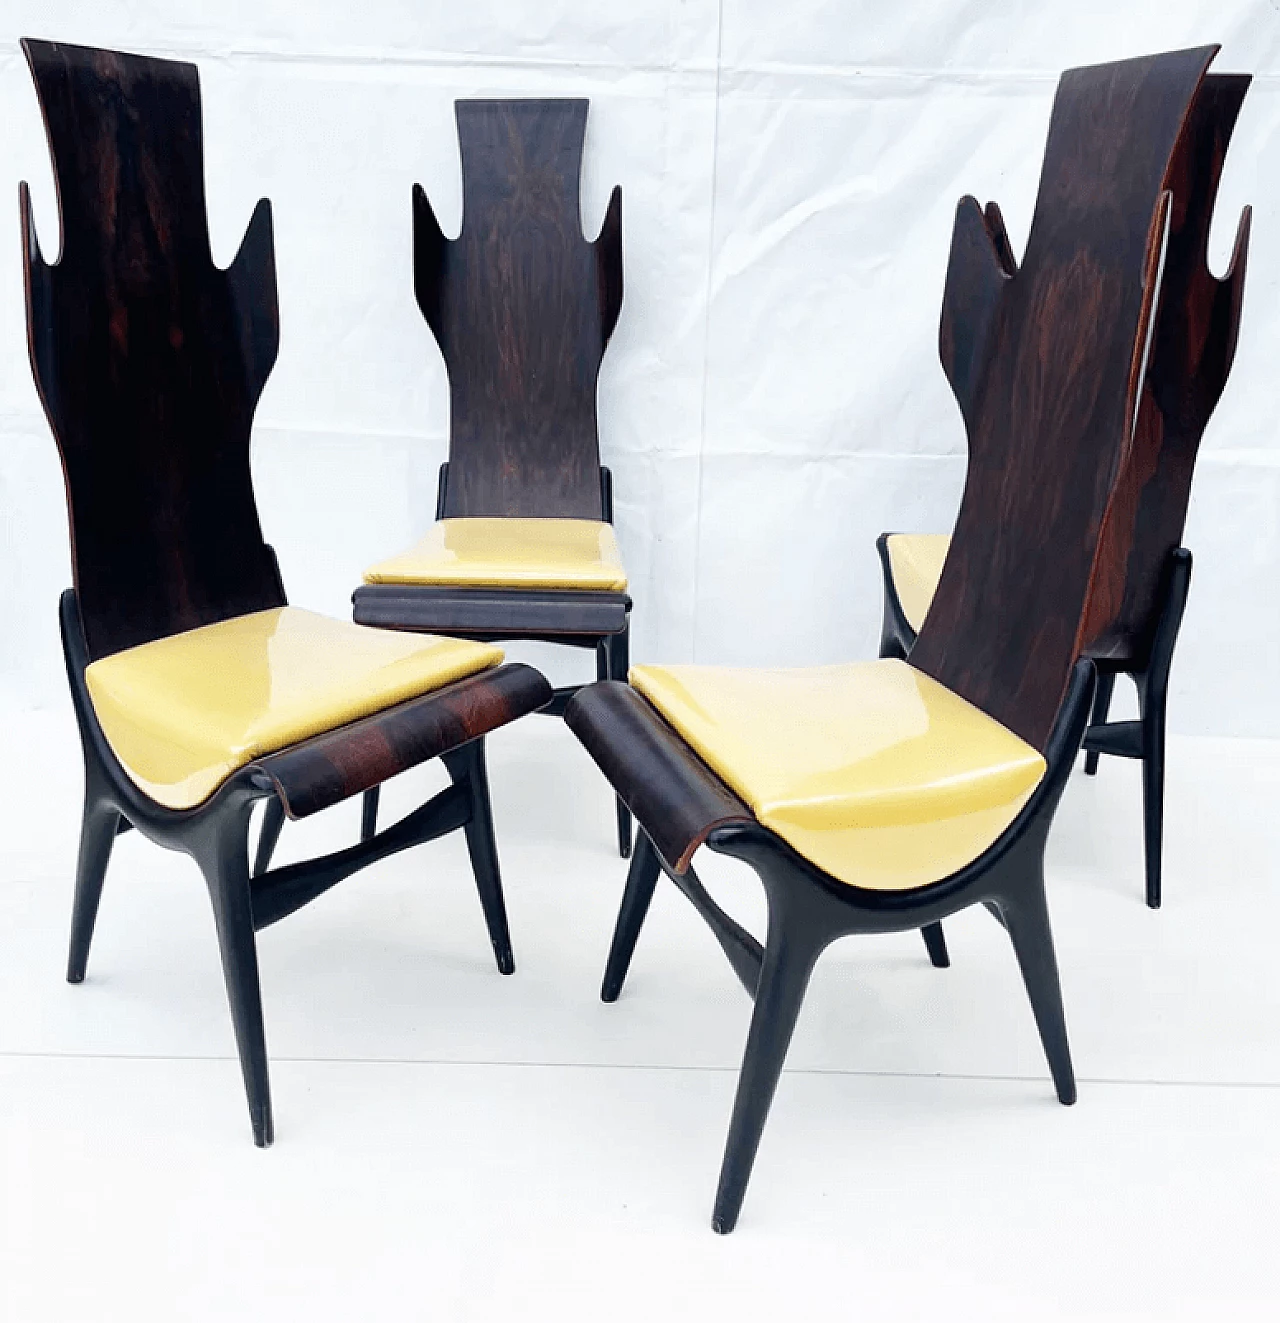 A table with 4 chairs by Dante Latorre, 1950s 3